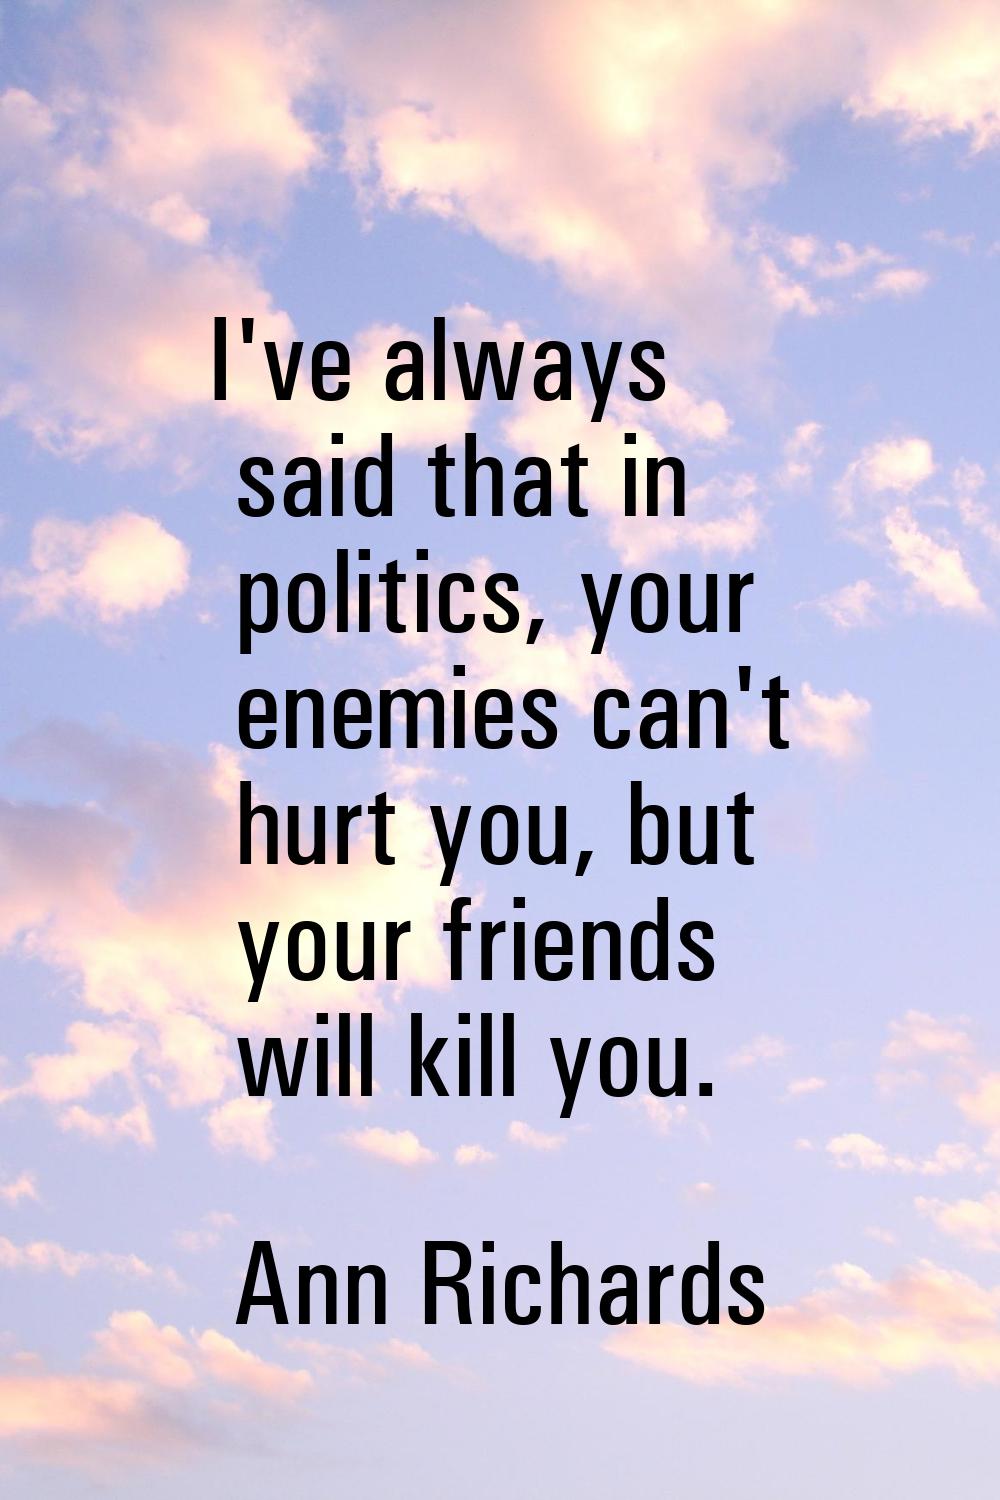 I've always said that in politics, your enemies can't hurt you, but your friends will kill you.